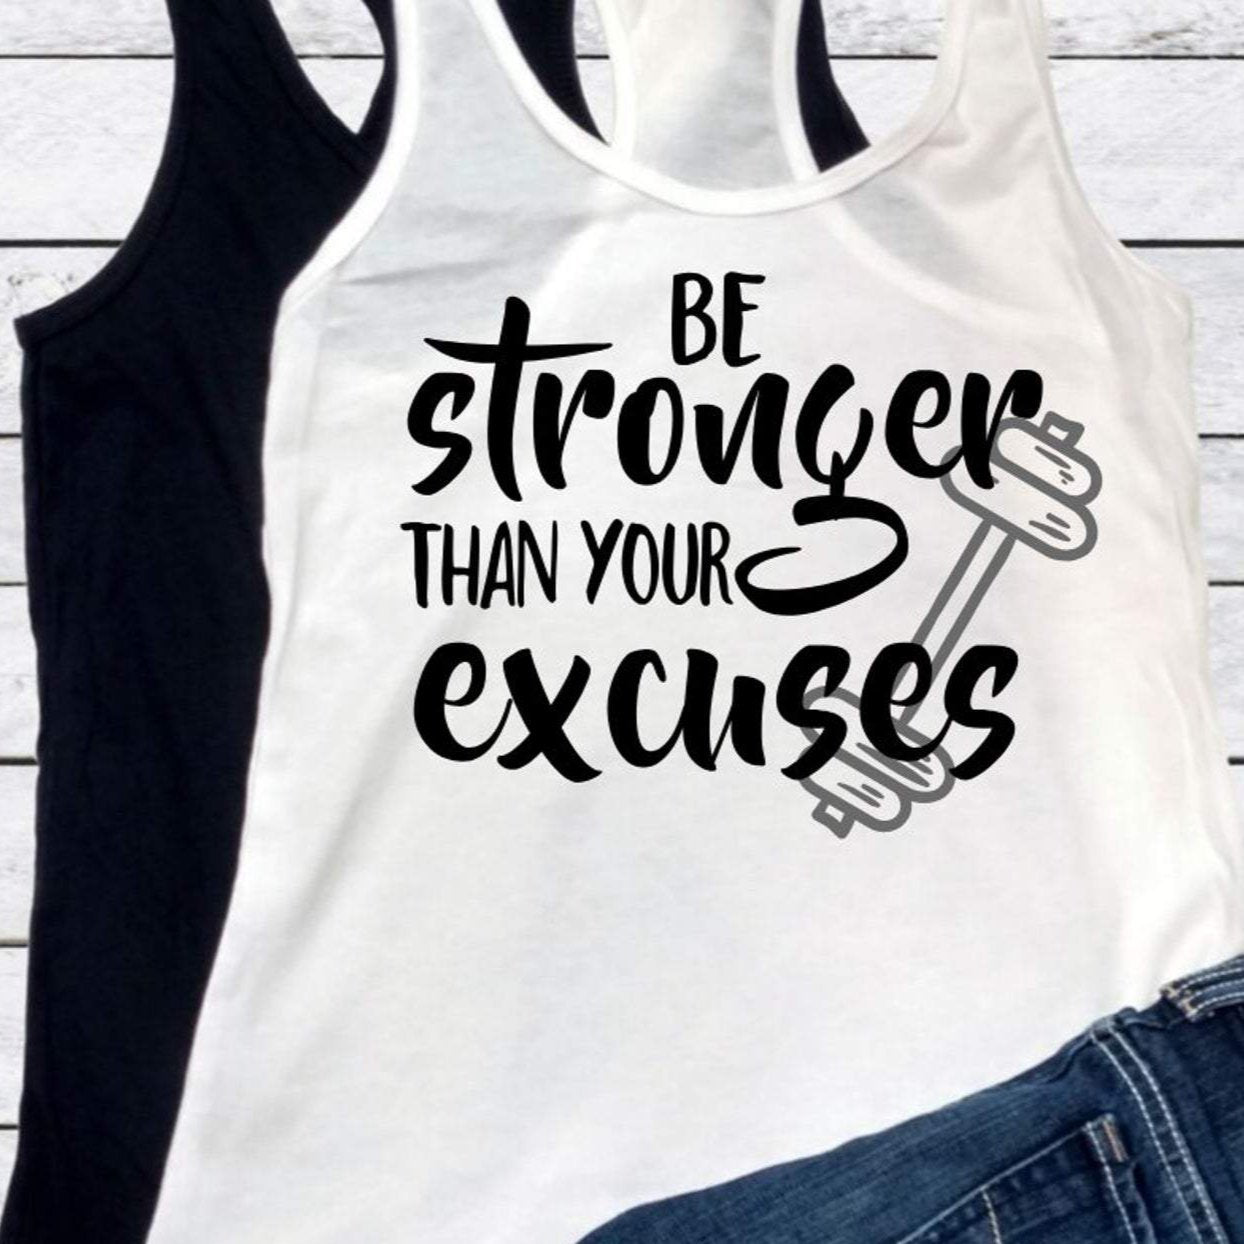 Funny Workout Tops for Women Racerback with Saying It's Not